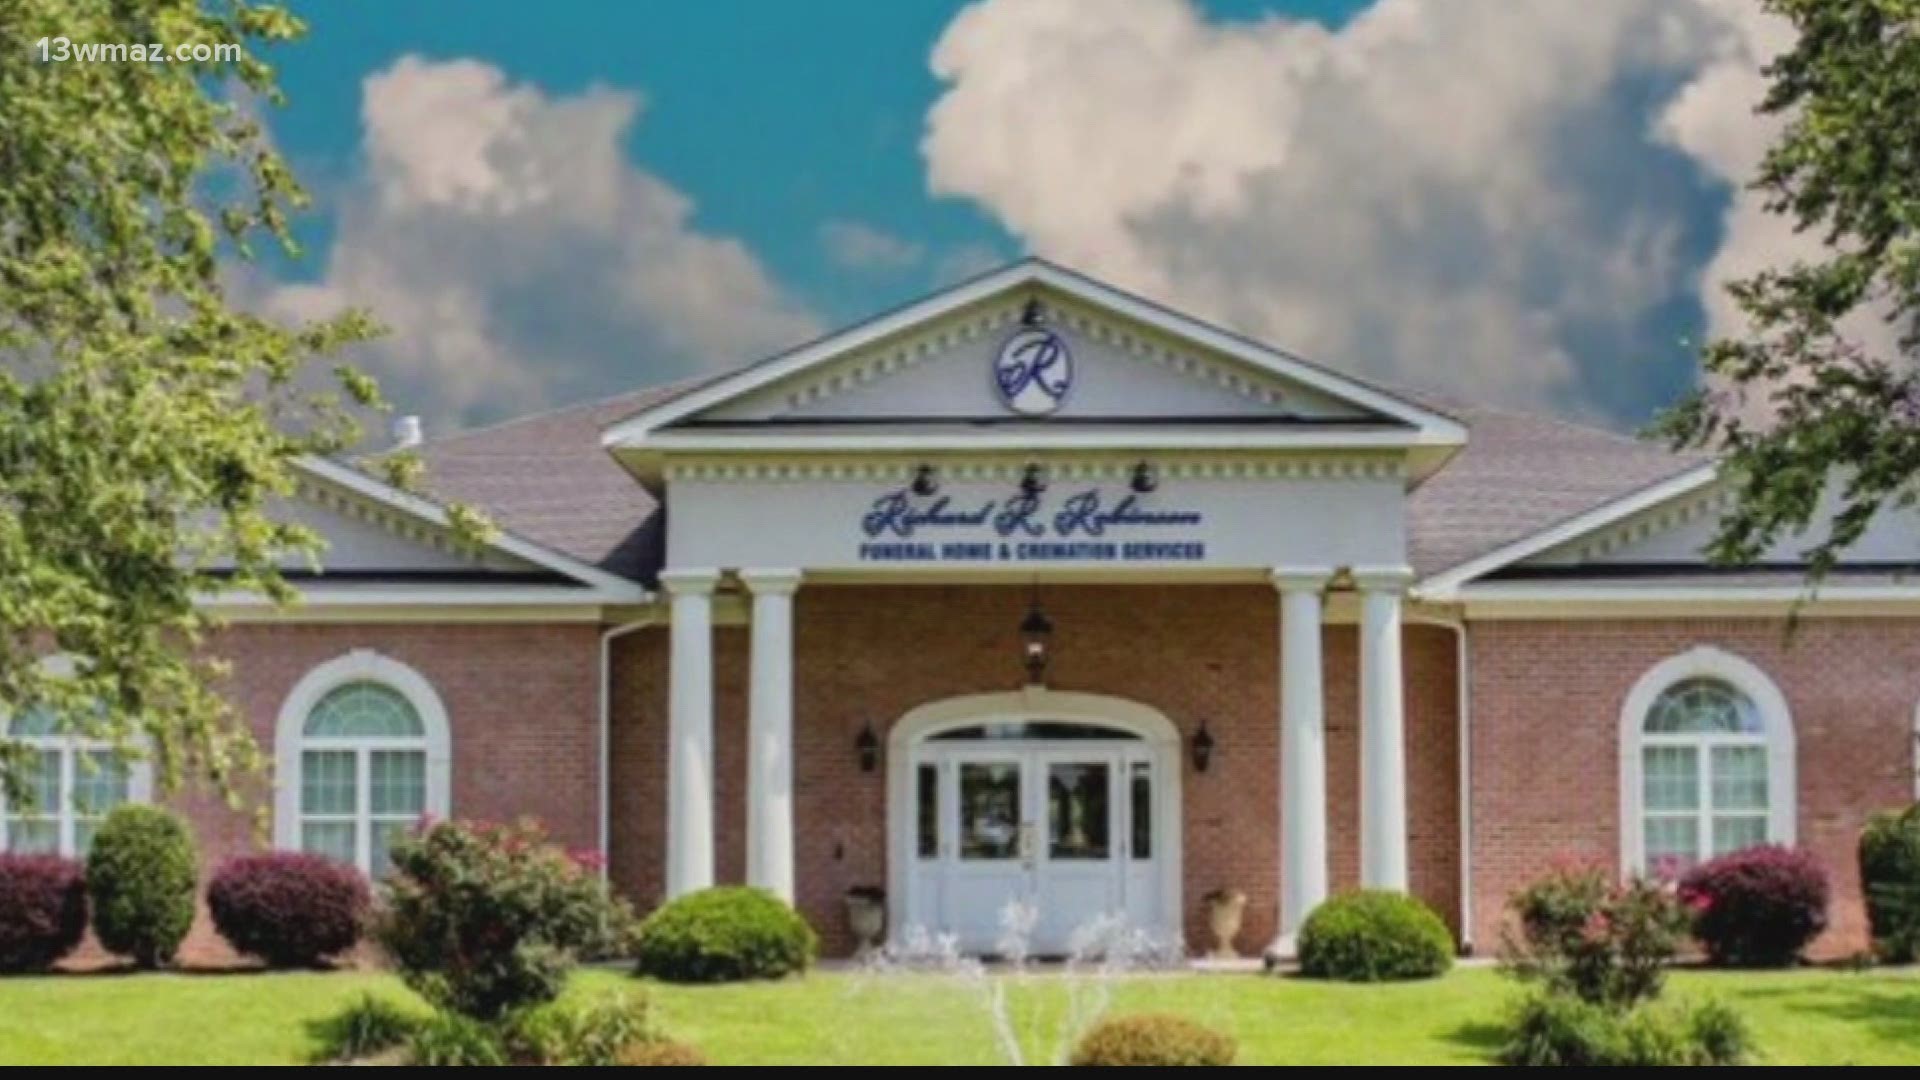 In Georgia, we saw our deadliest day earlier this month. A Central Georgia funeral home says business has been busier due in part to COVID-19.